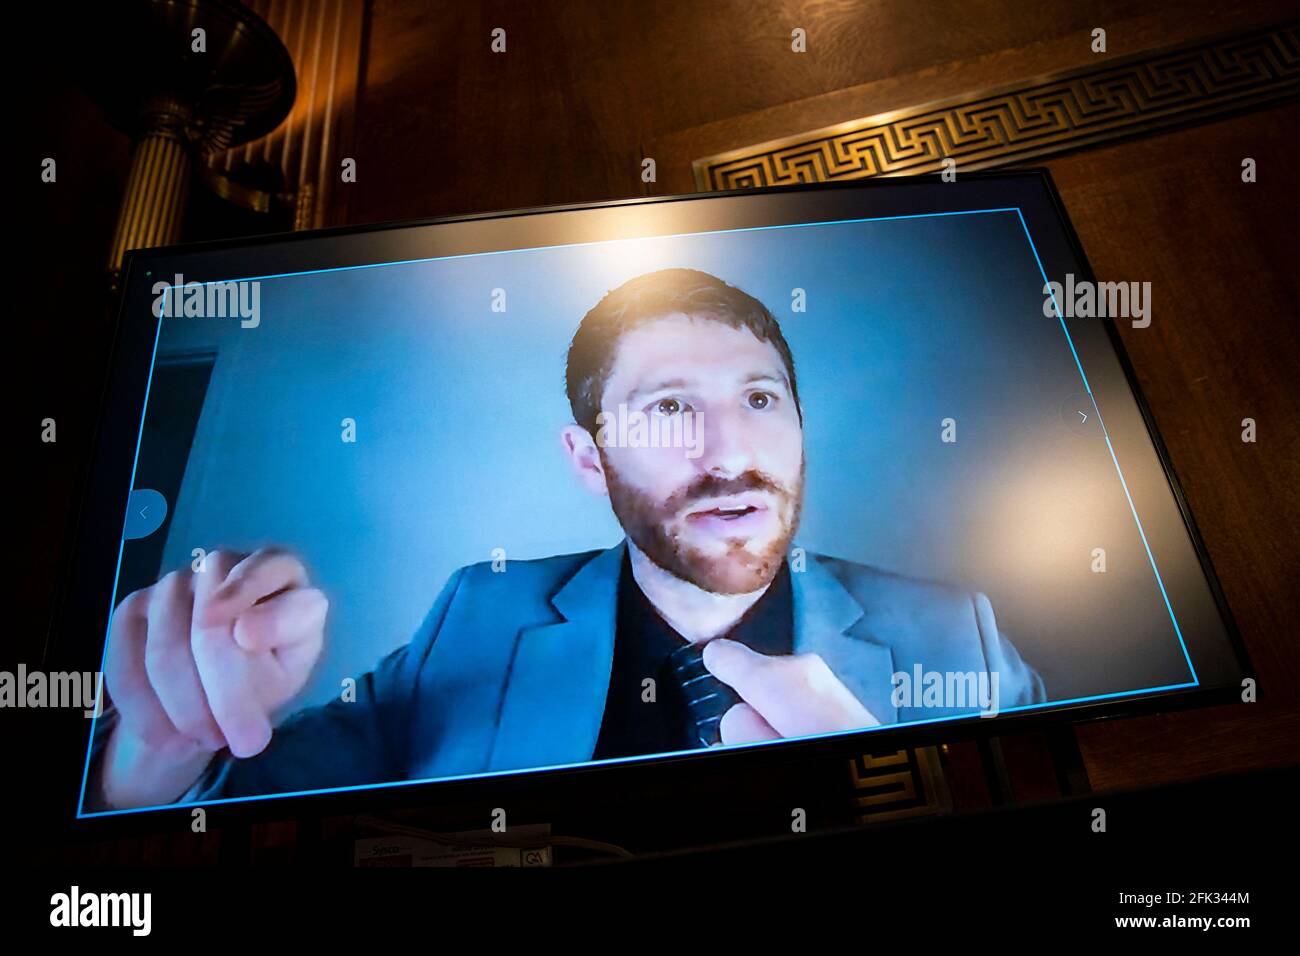 Tristan Harris, co-founder and president at the Center for Humane Technology, testifies virtually during a Senate Judiciary Subcommittee hearing in Washington, DC, USA on Tuesday, April 27, 2021. The hearing is examining the effect social media companies' algorithms and design choices have on users and discourse. Photo by Al Drago/Pool/ABACAPRESS.COM Stock Photo